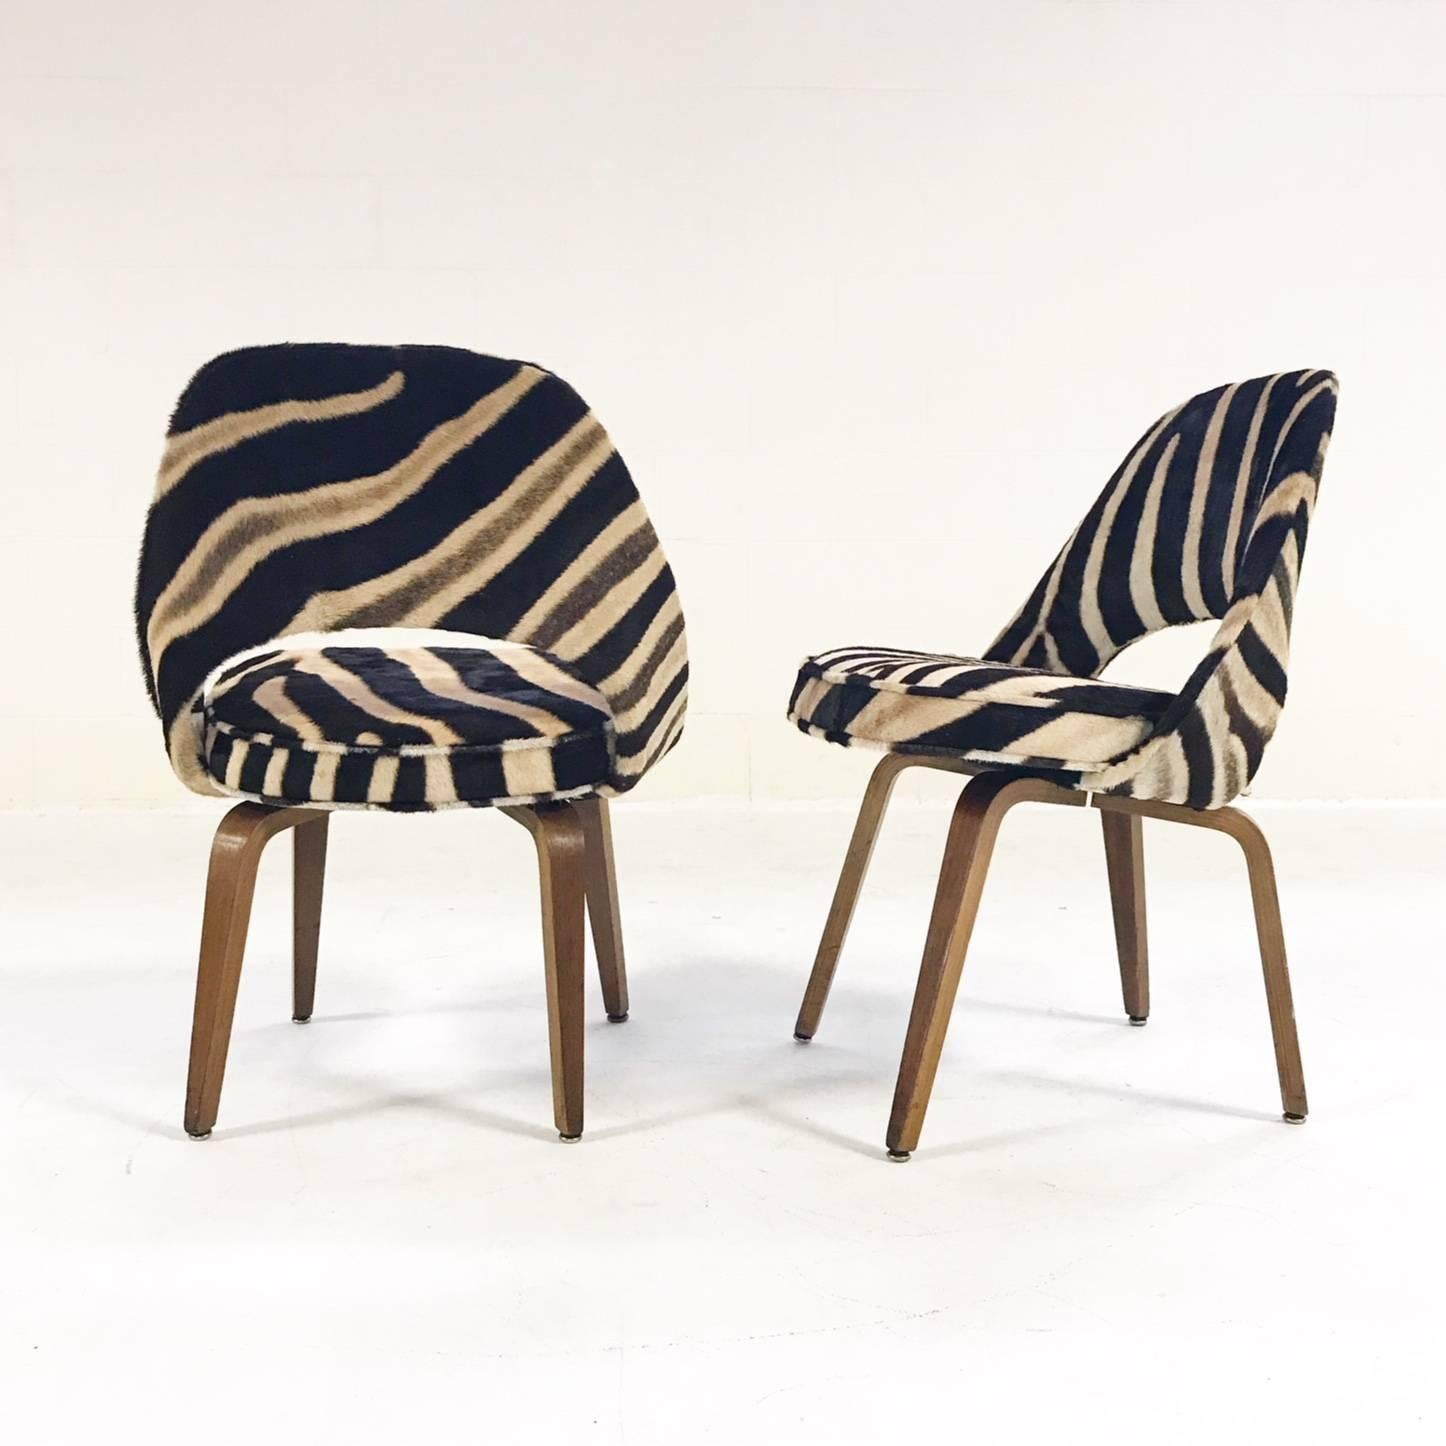 Vintage Eero Saarinen Executive Chairs for Knoll with Walnut Legs in Zebra Hide In Excellent Condition In SAINT LOUIS, MO